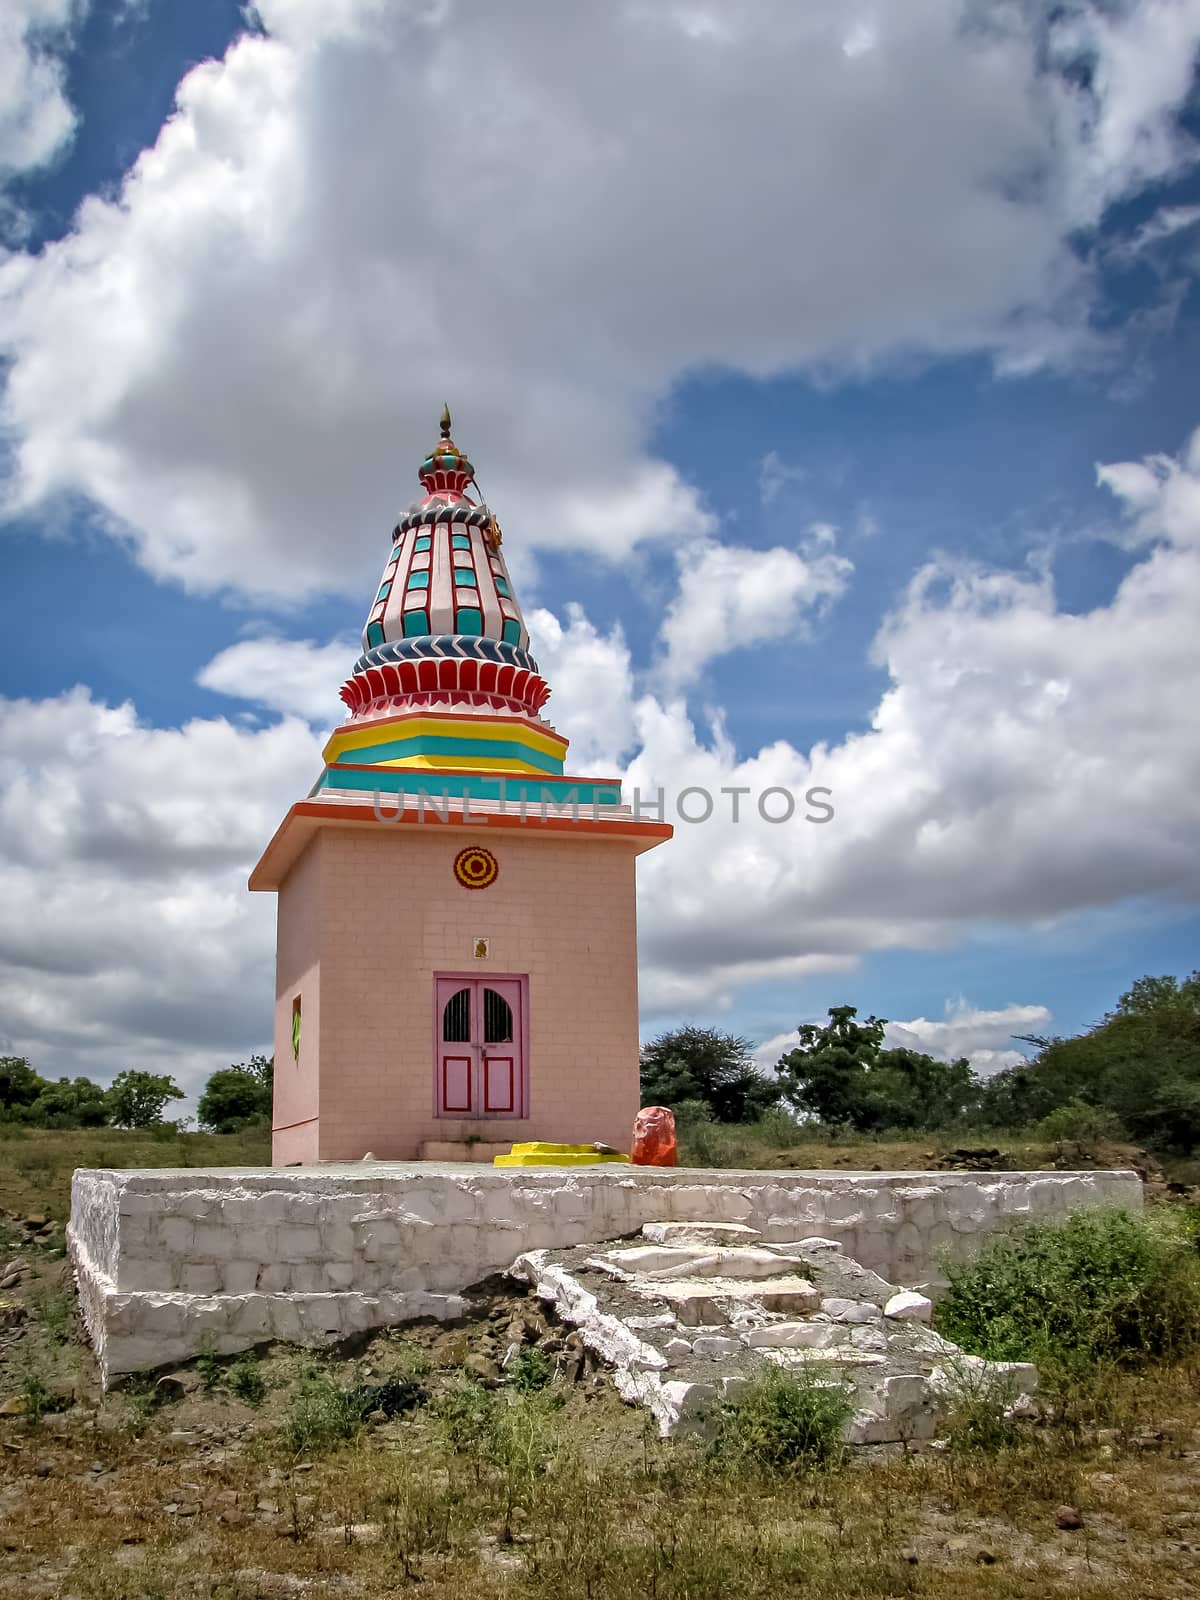 On the background of nice clouds, photo of Colorful isolated image of a temple in the outskirts of village. by lalam